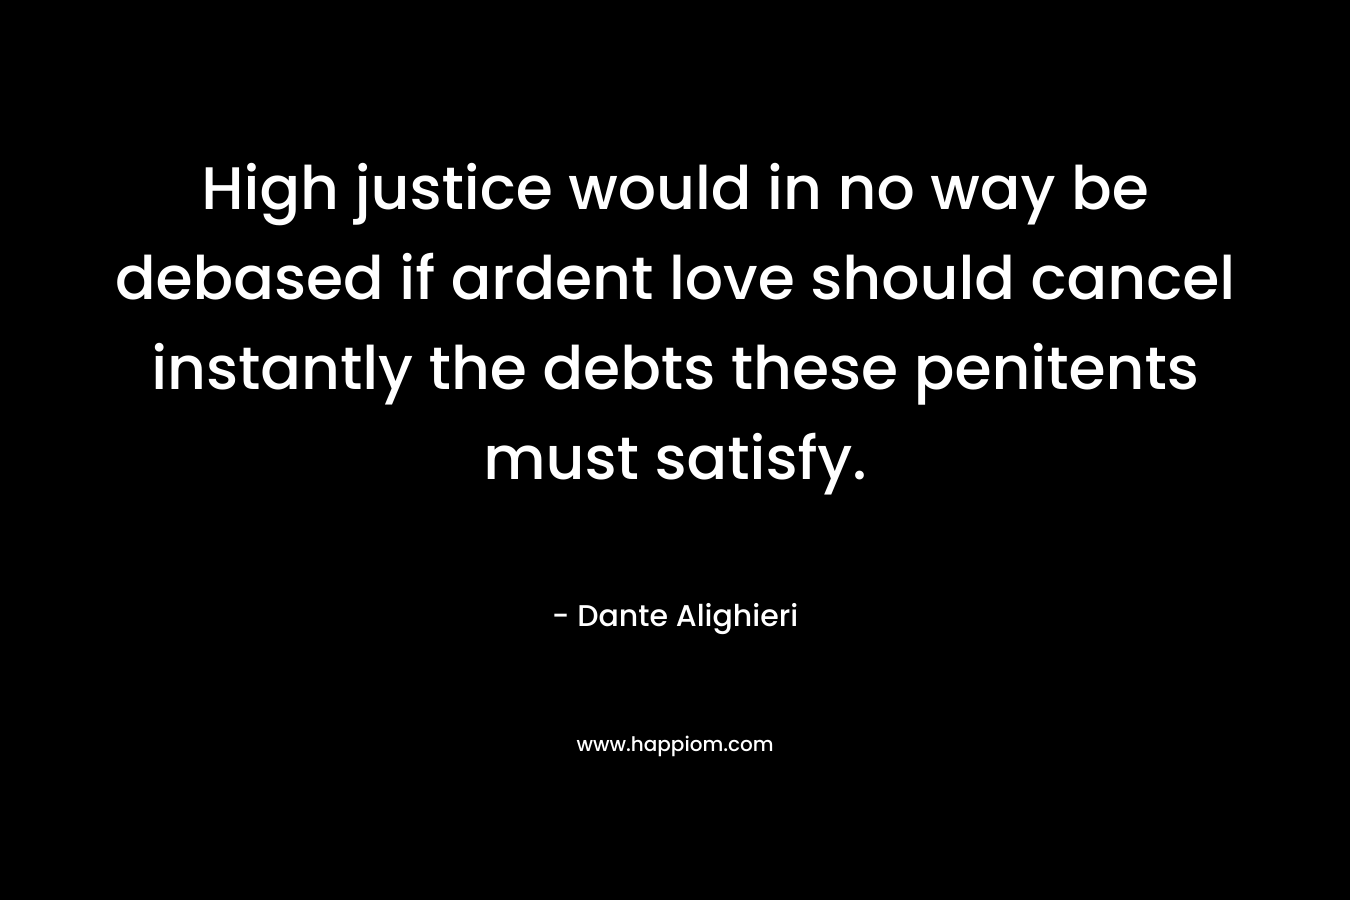 High justice would in no way be debased if ardent love should cancel instantly the debts these penitents must satisfy. – Dante Alighieri